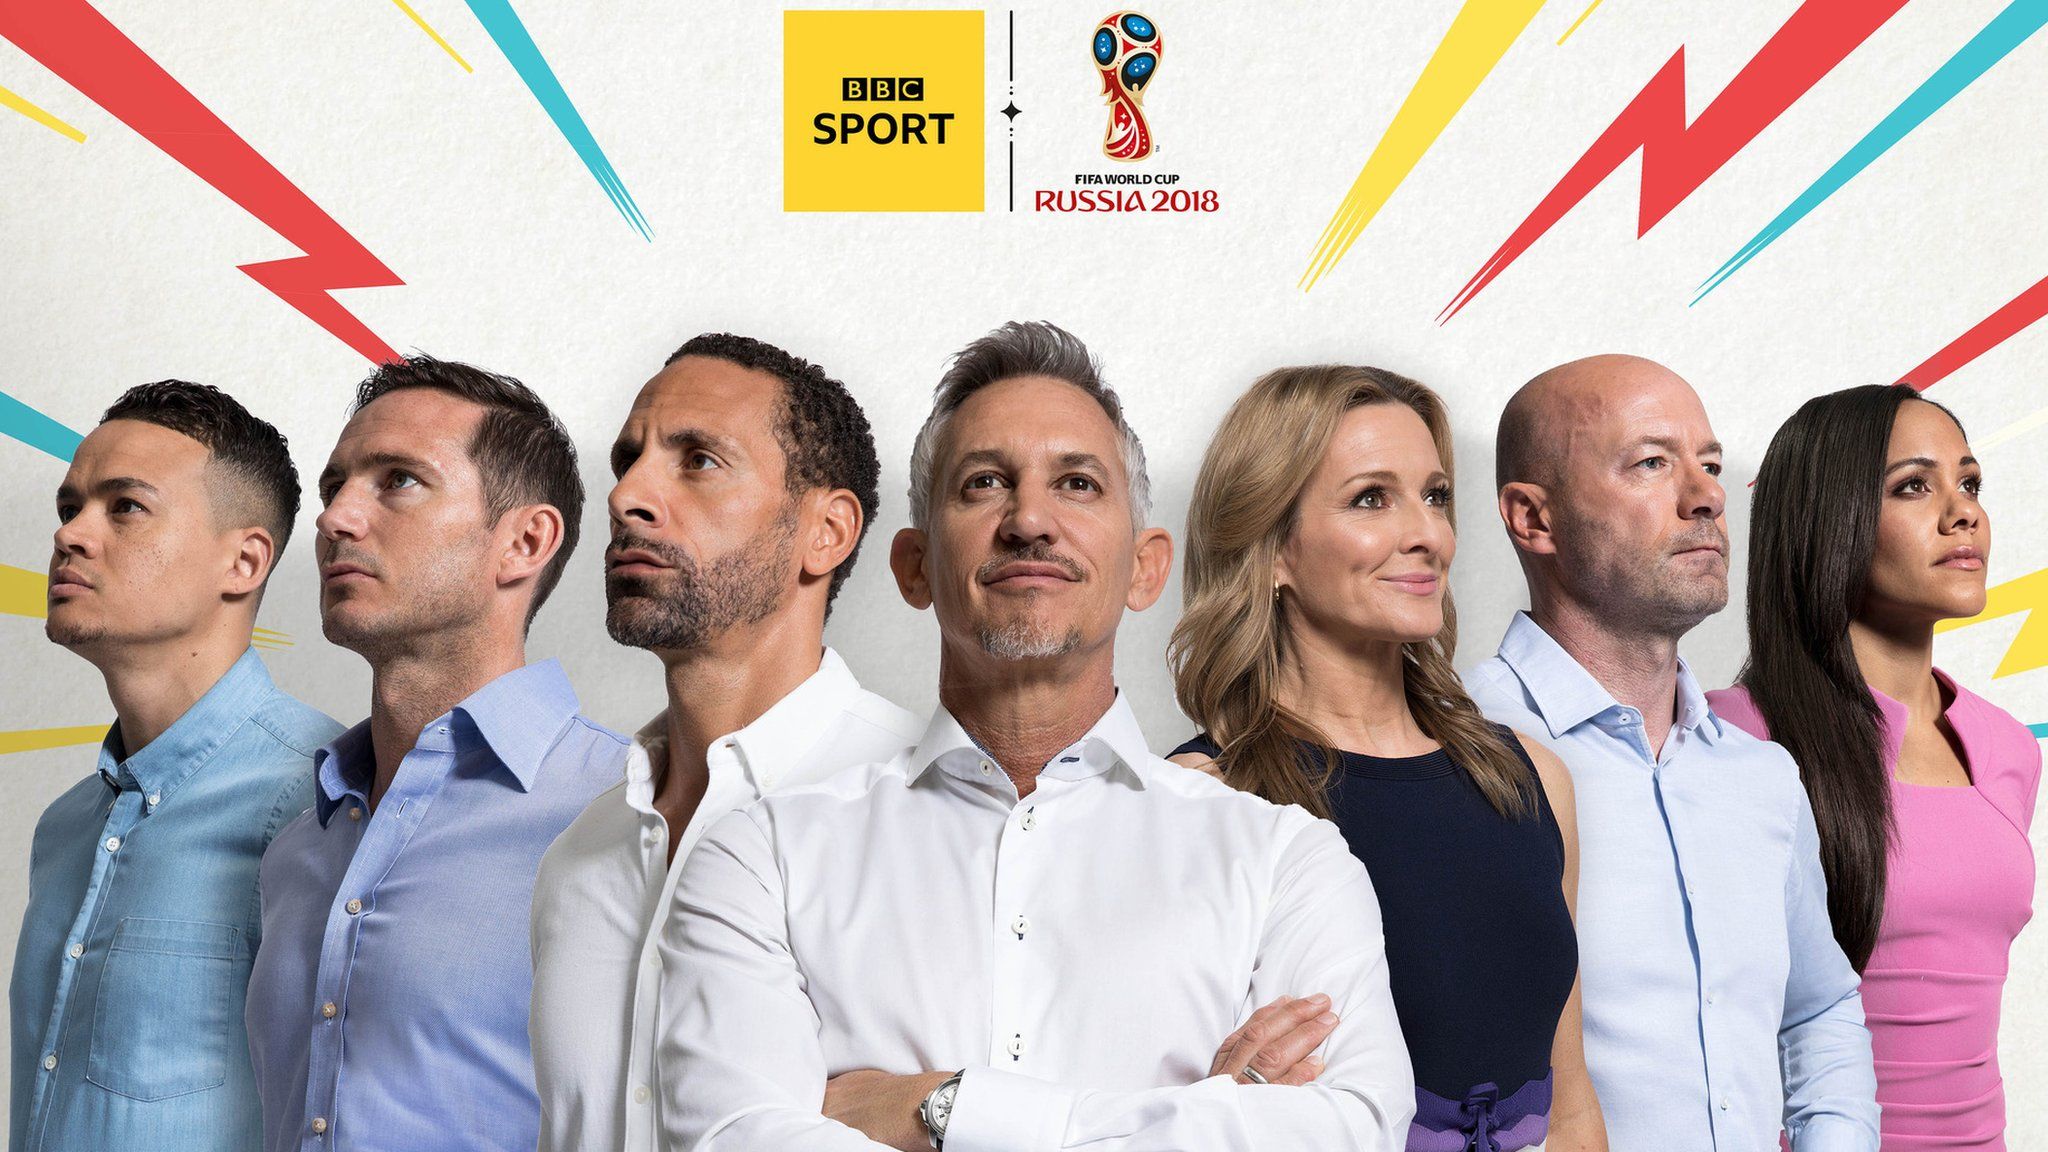 BBC World Cup presenters and pundits